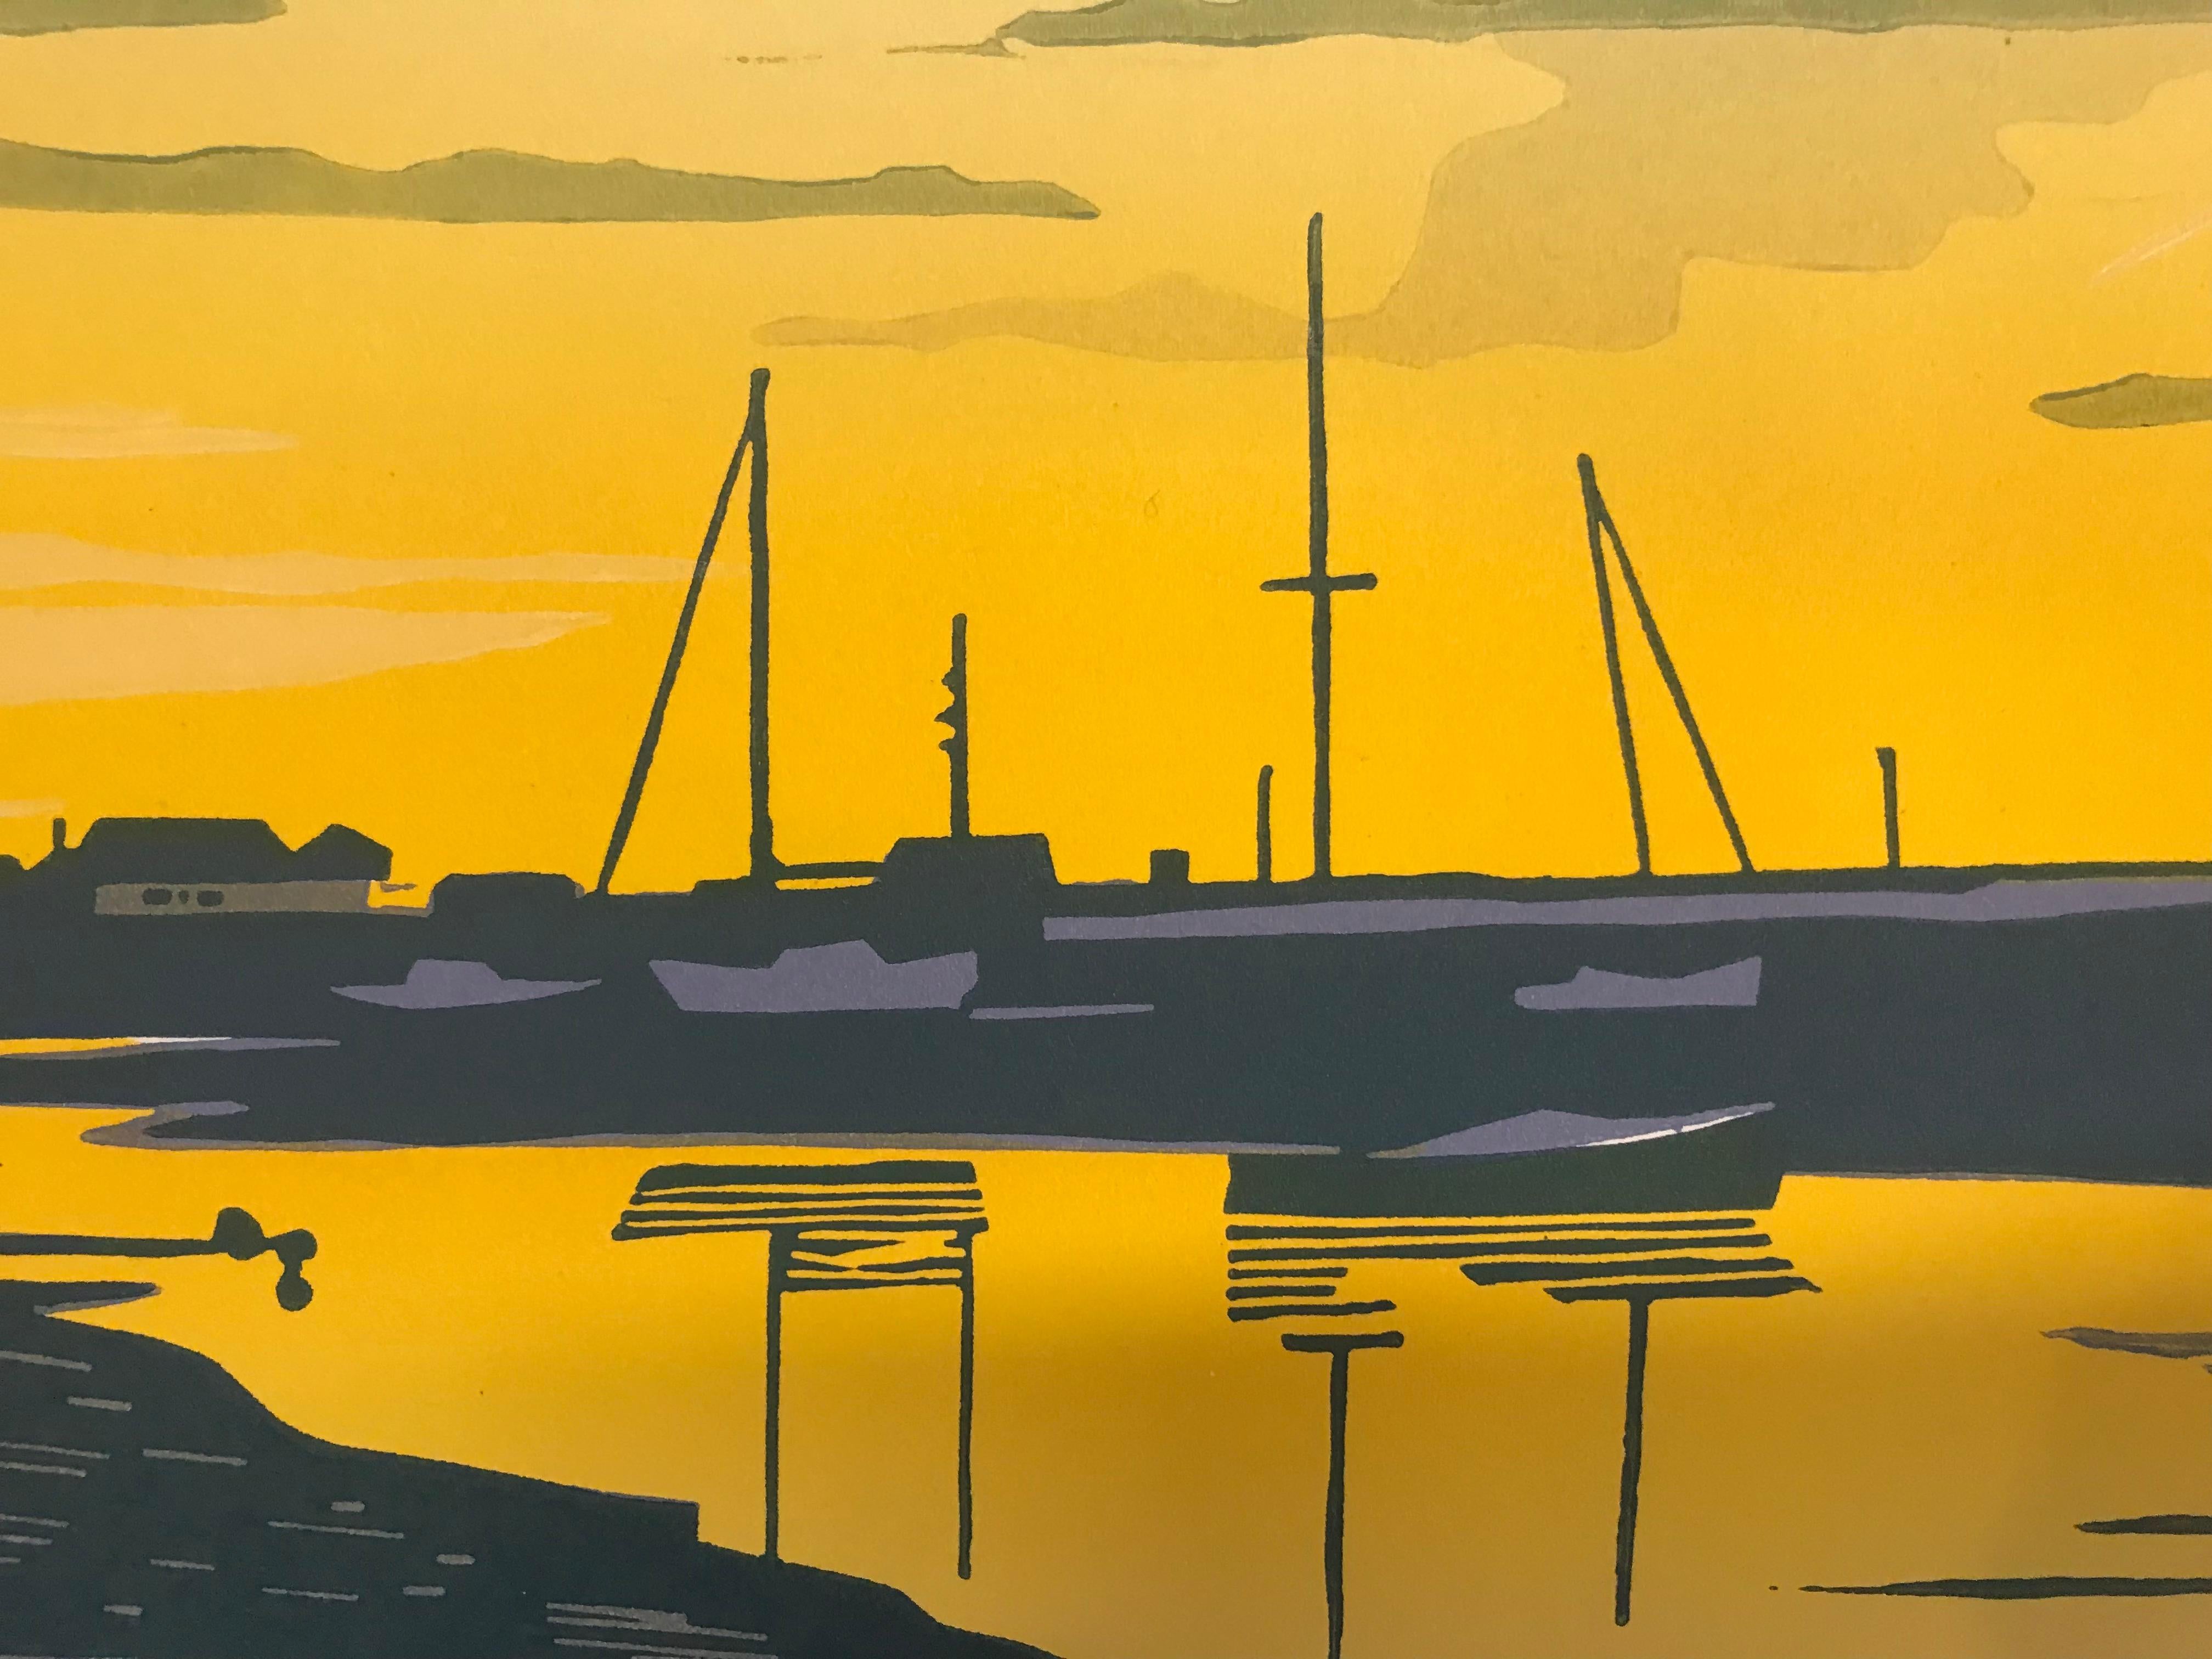 Wells Sunset is a lino print by Colin Moore. The sunset scene shows the coastline of Wells in Somerset, complete with boats on the horizon and drifting clouds above the setting sun. Featuring his signature graphic use of line alongside a